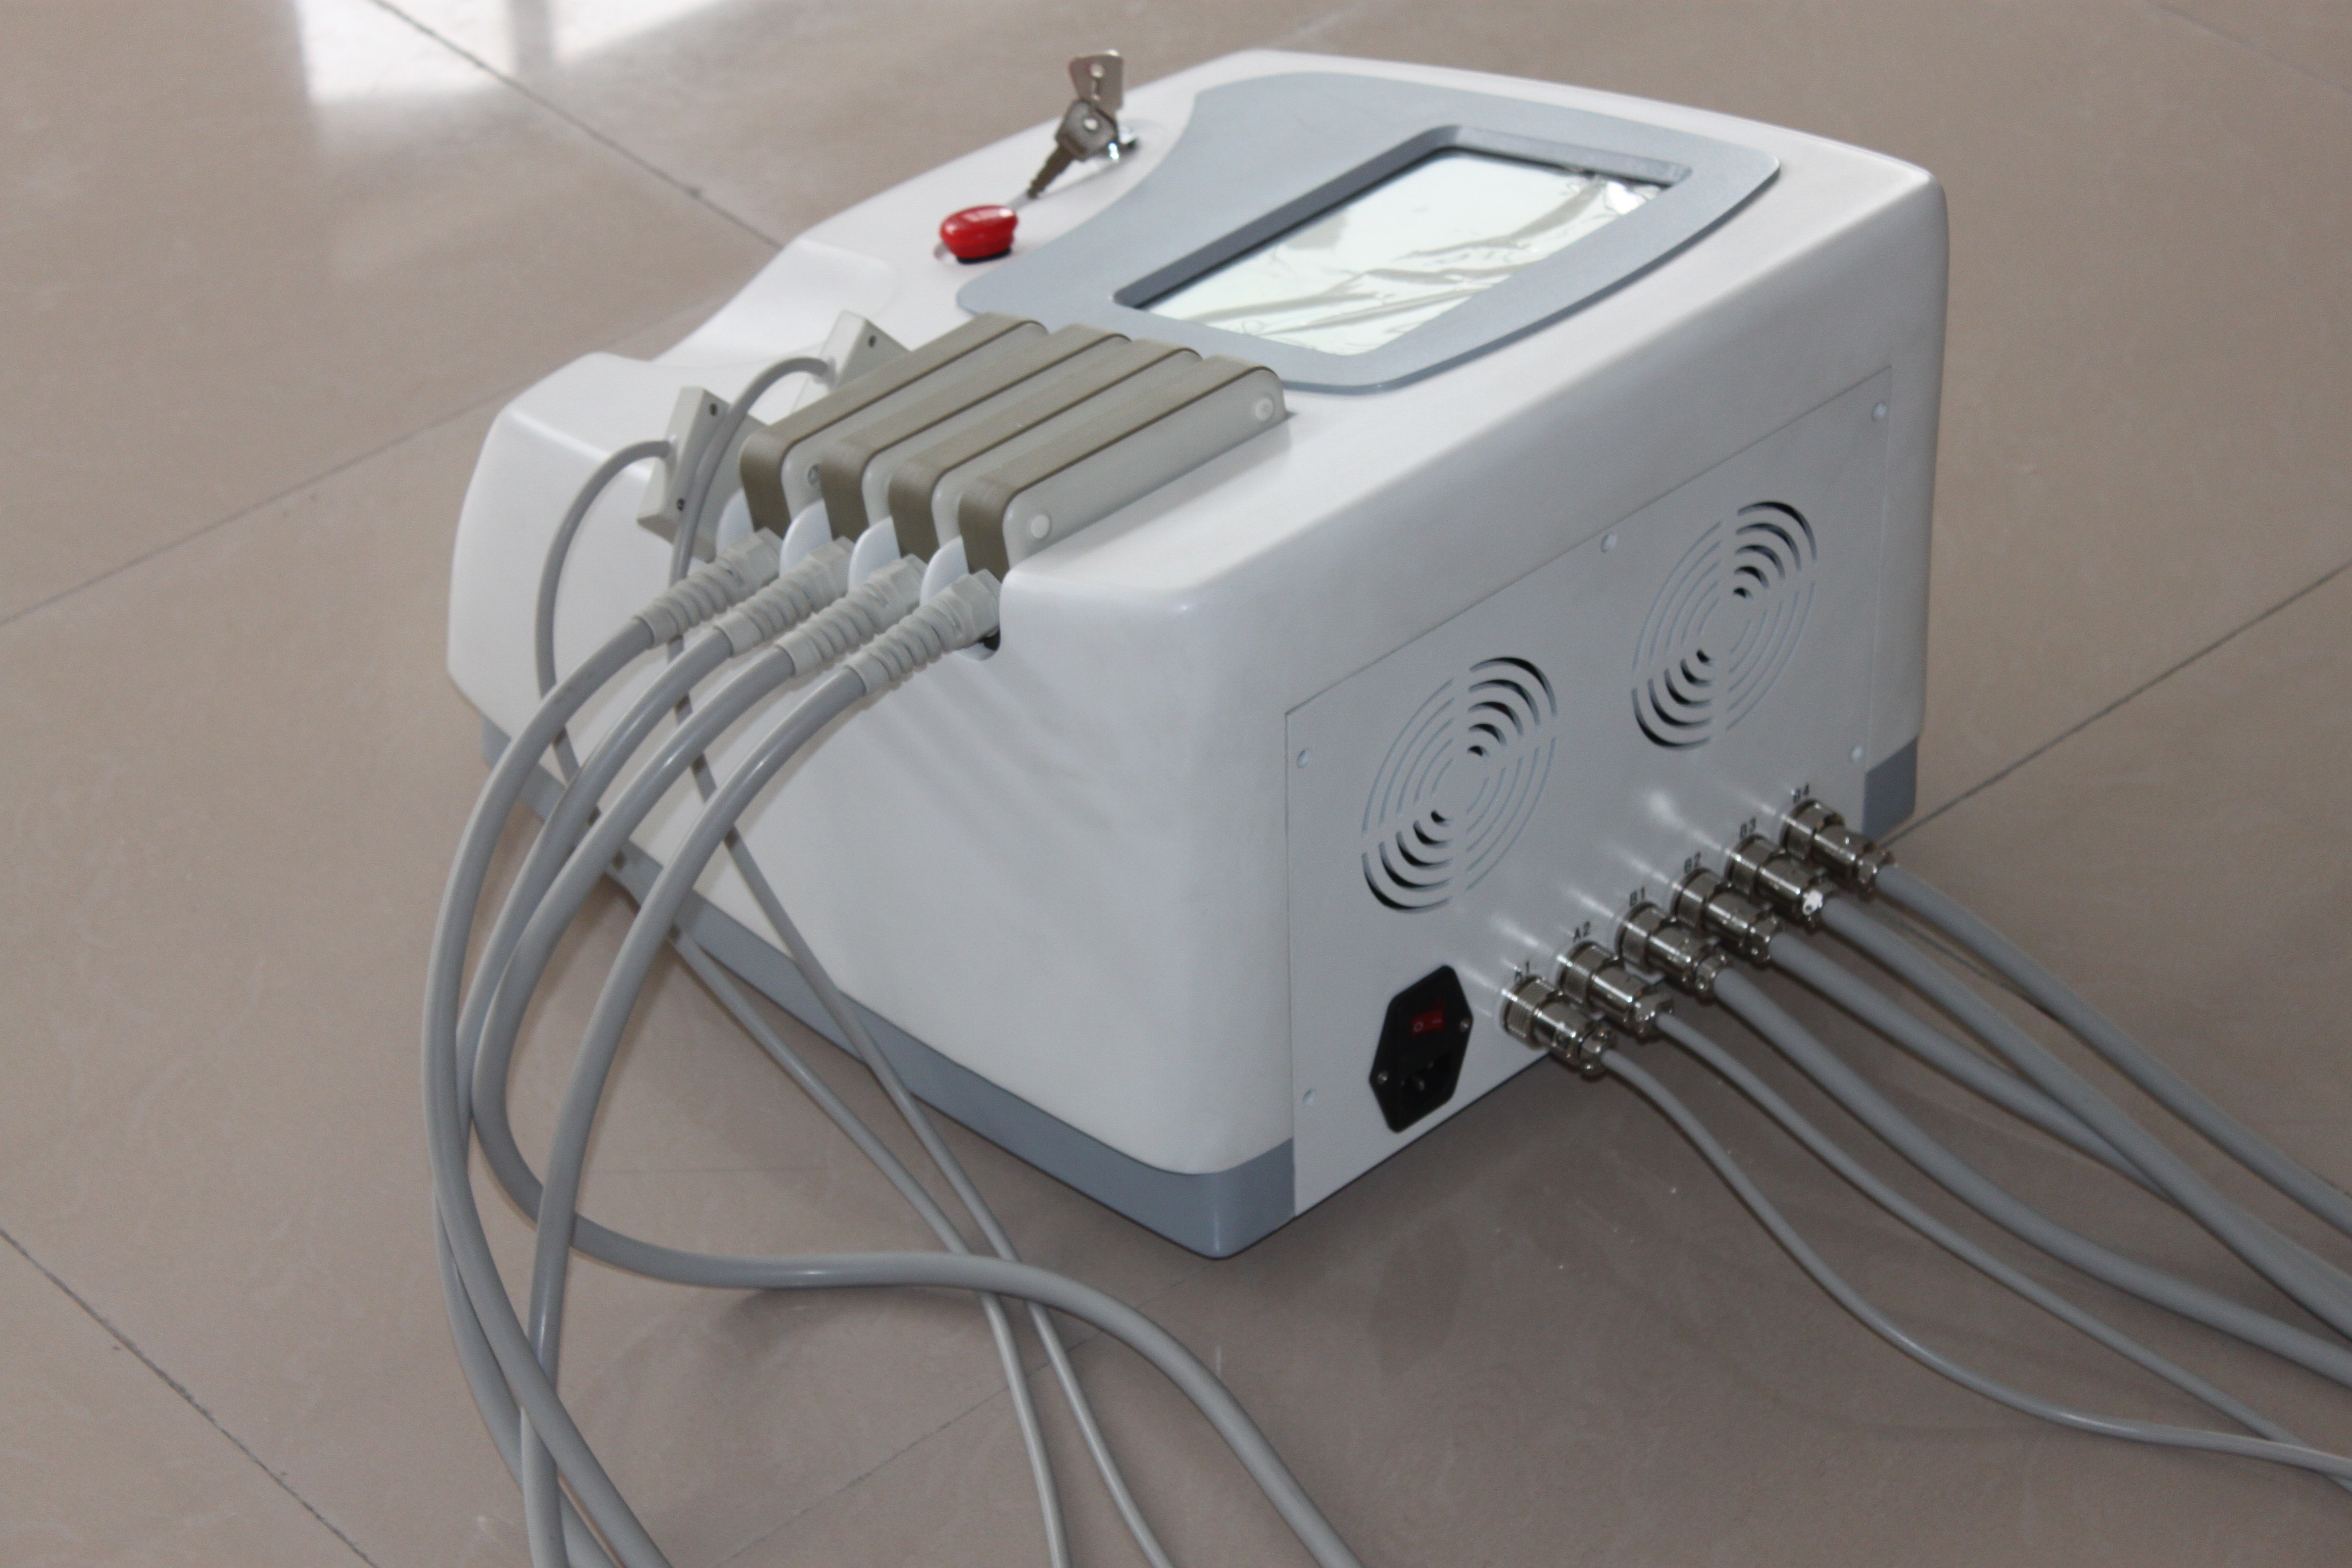 Cheap lipolaserly cryolipolysis weight loss beauty equipment lipolysis laser body slimming for sale